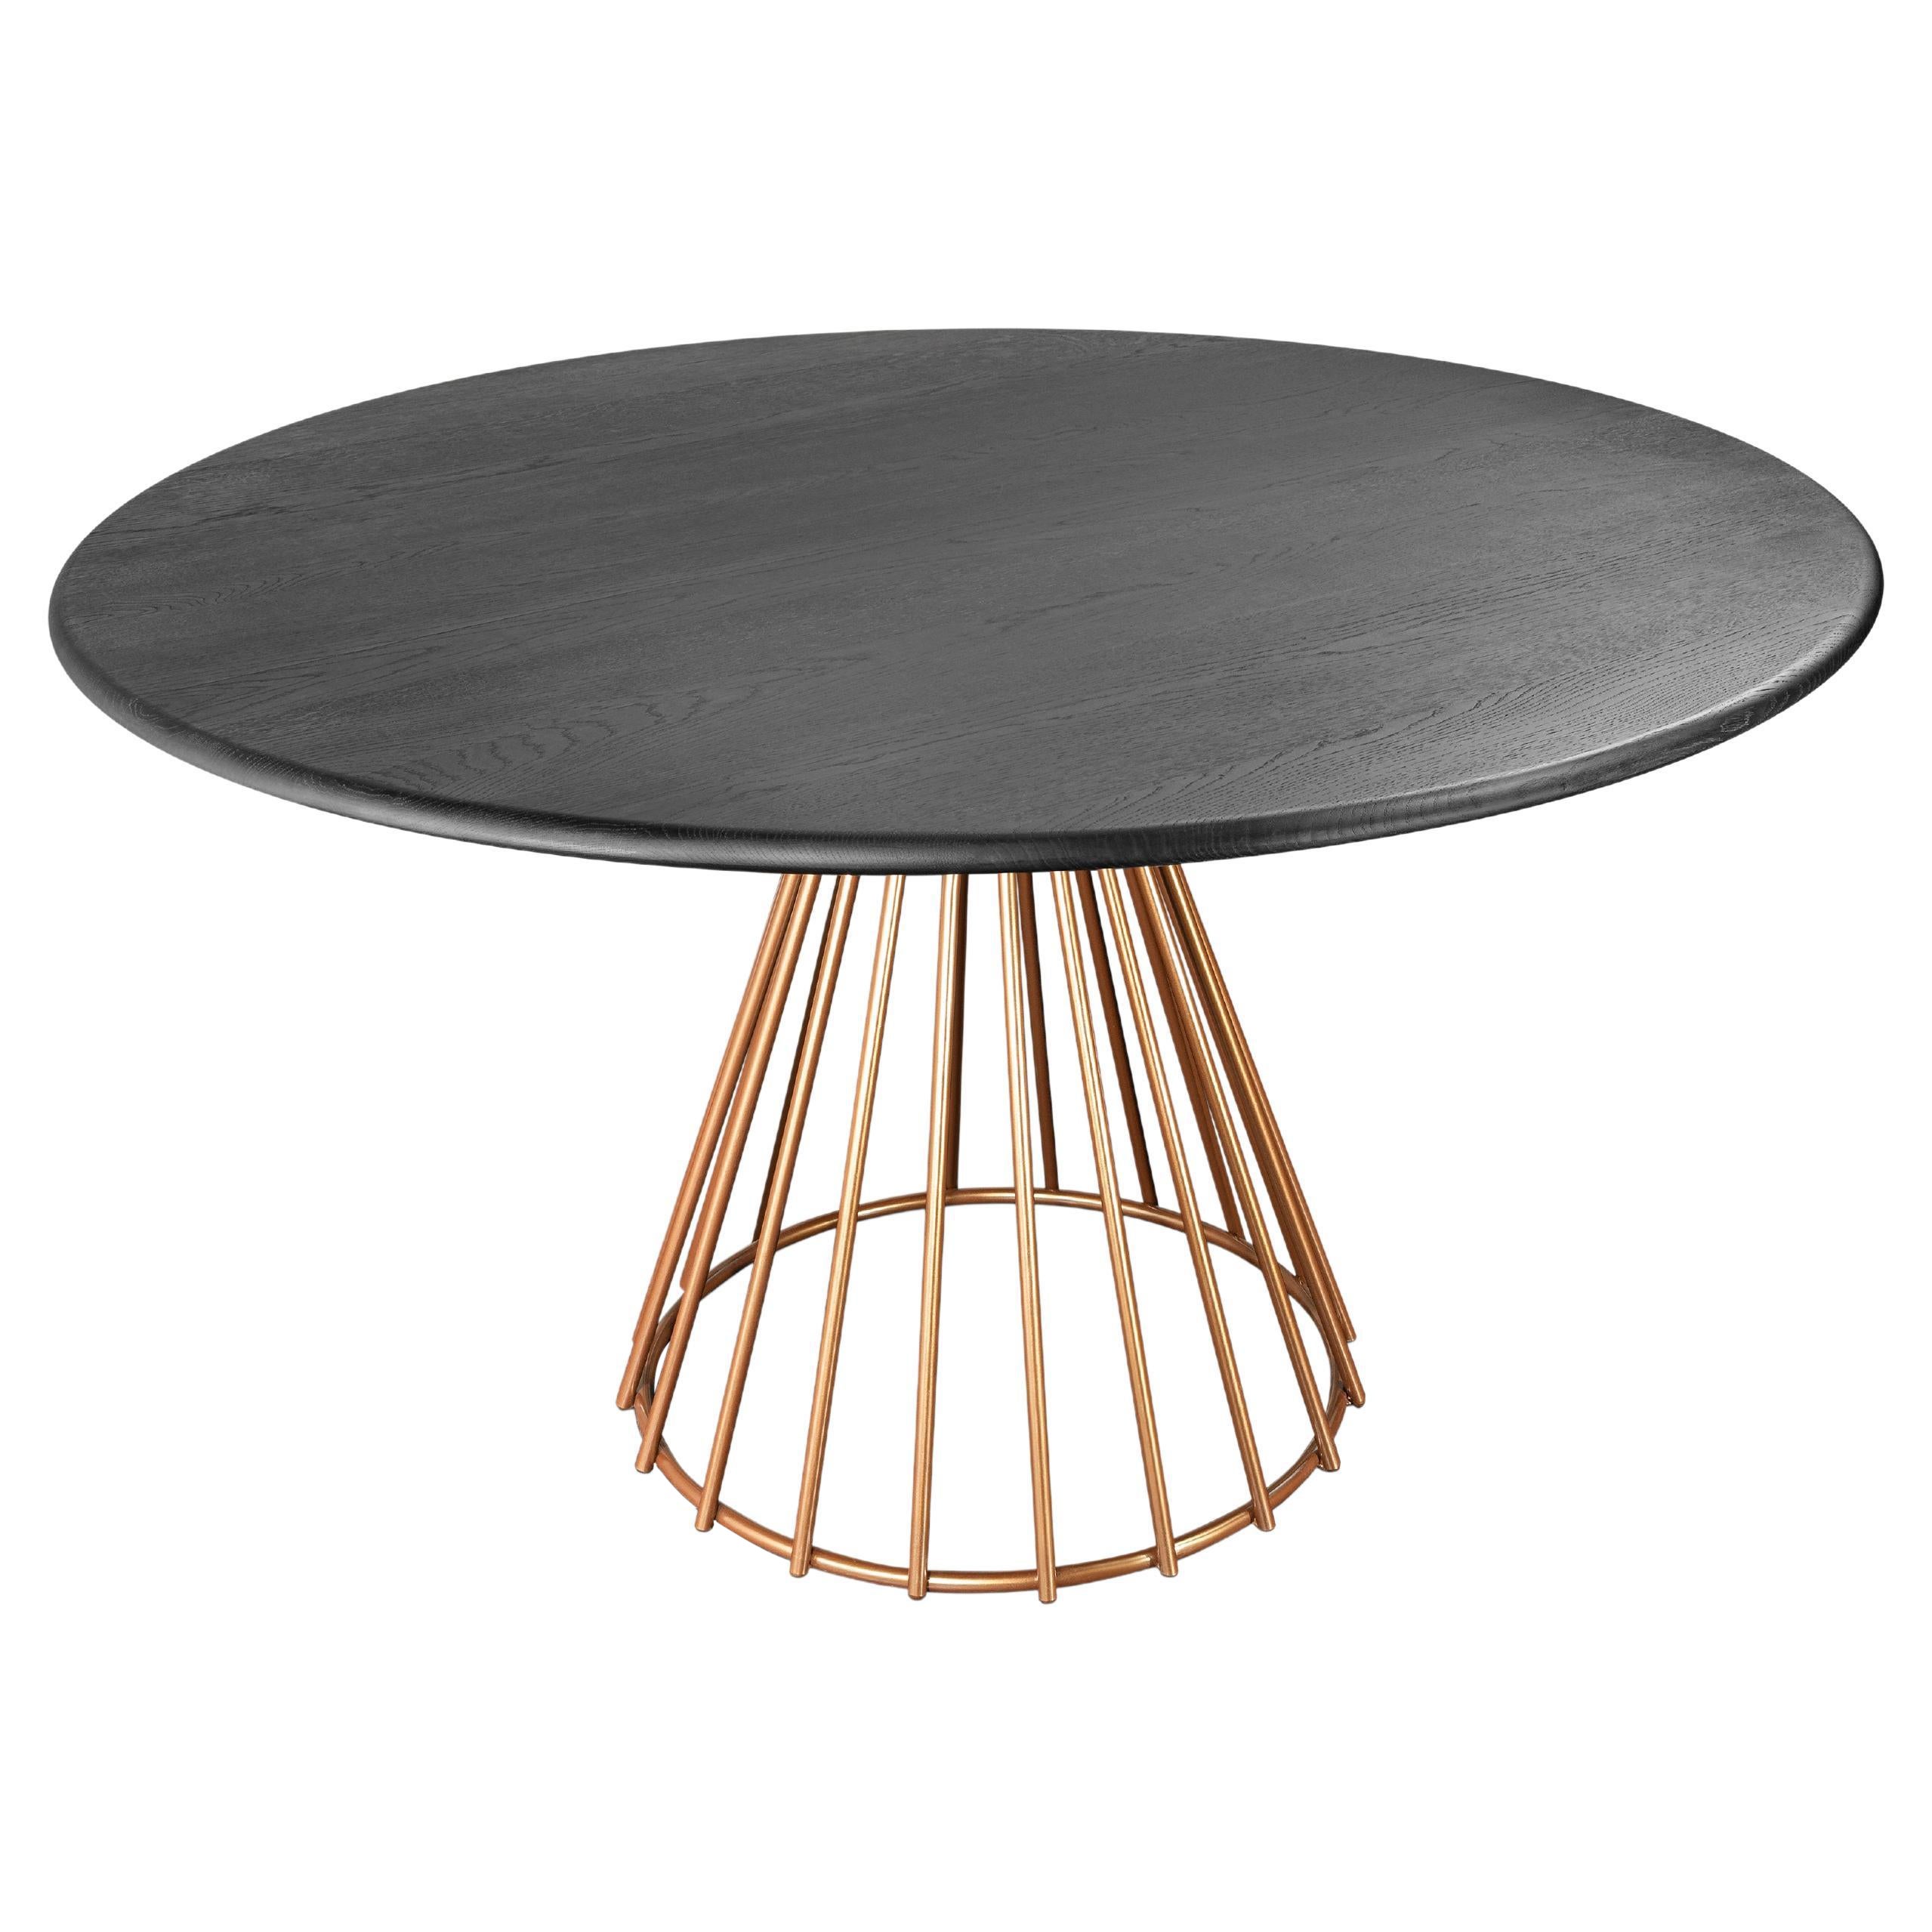 N.12 Dining Table by TImbart